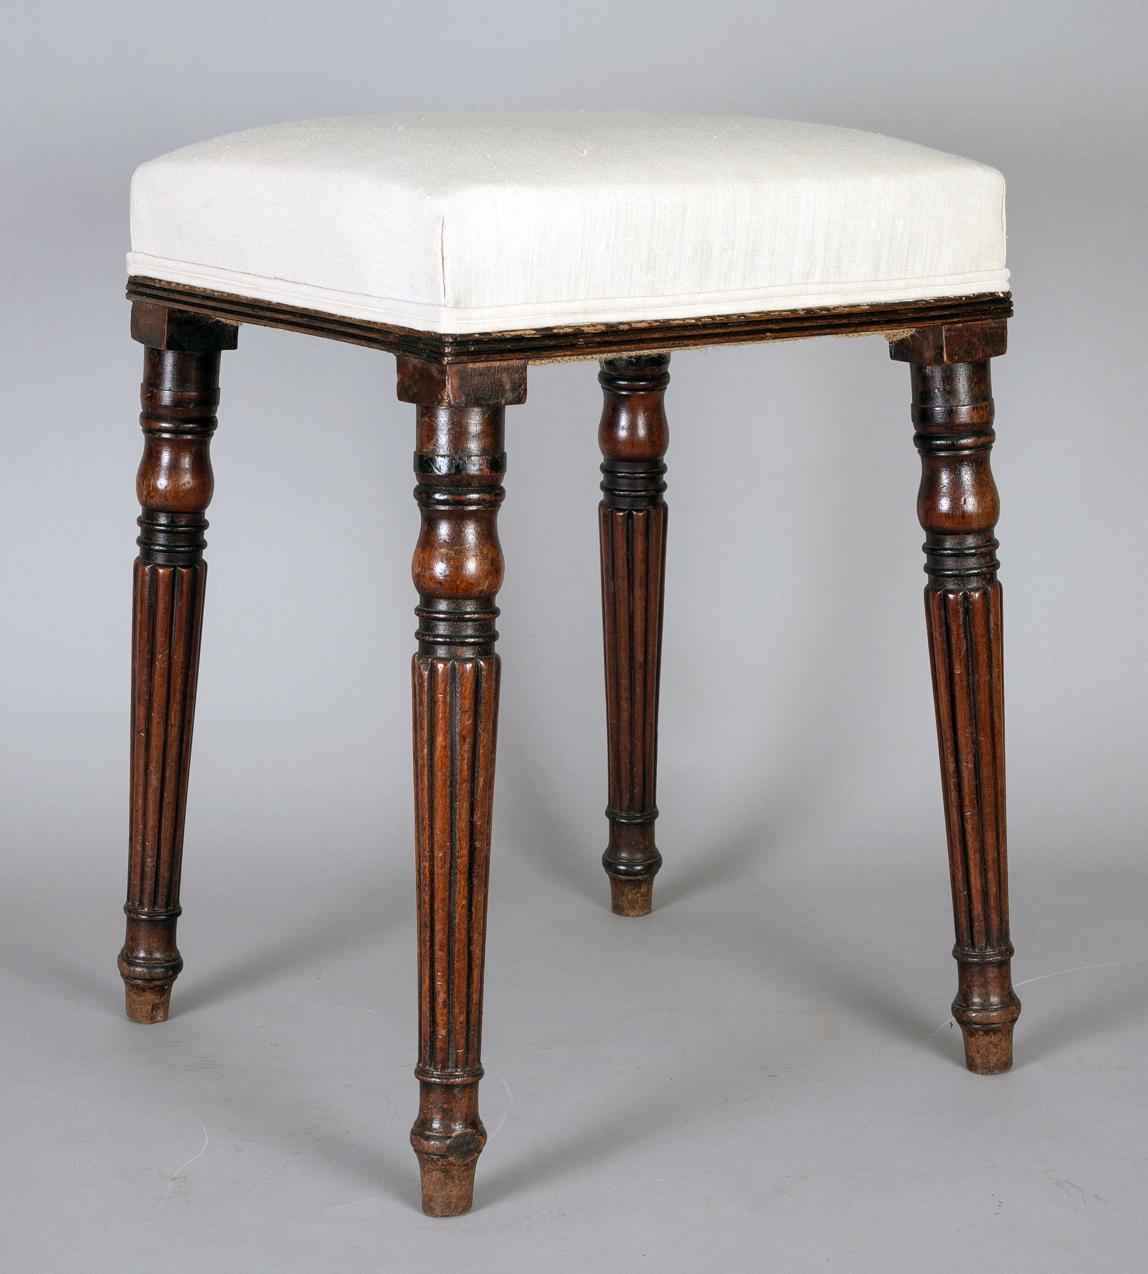 Regency mahogany stool with slender reeded and turned legs. Upholstered in an off-white linen fabric.